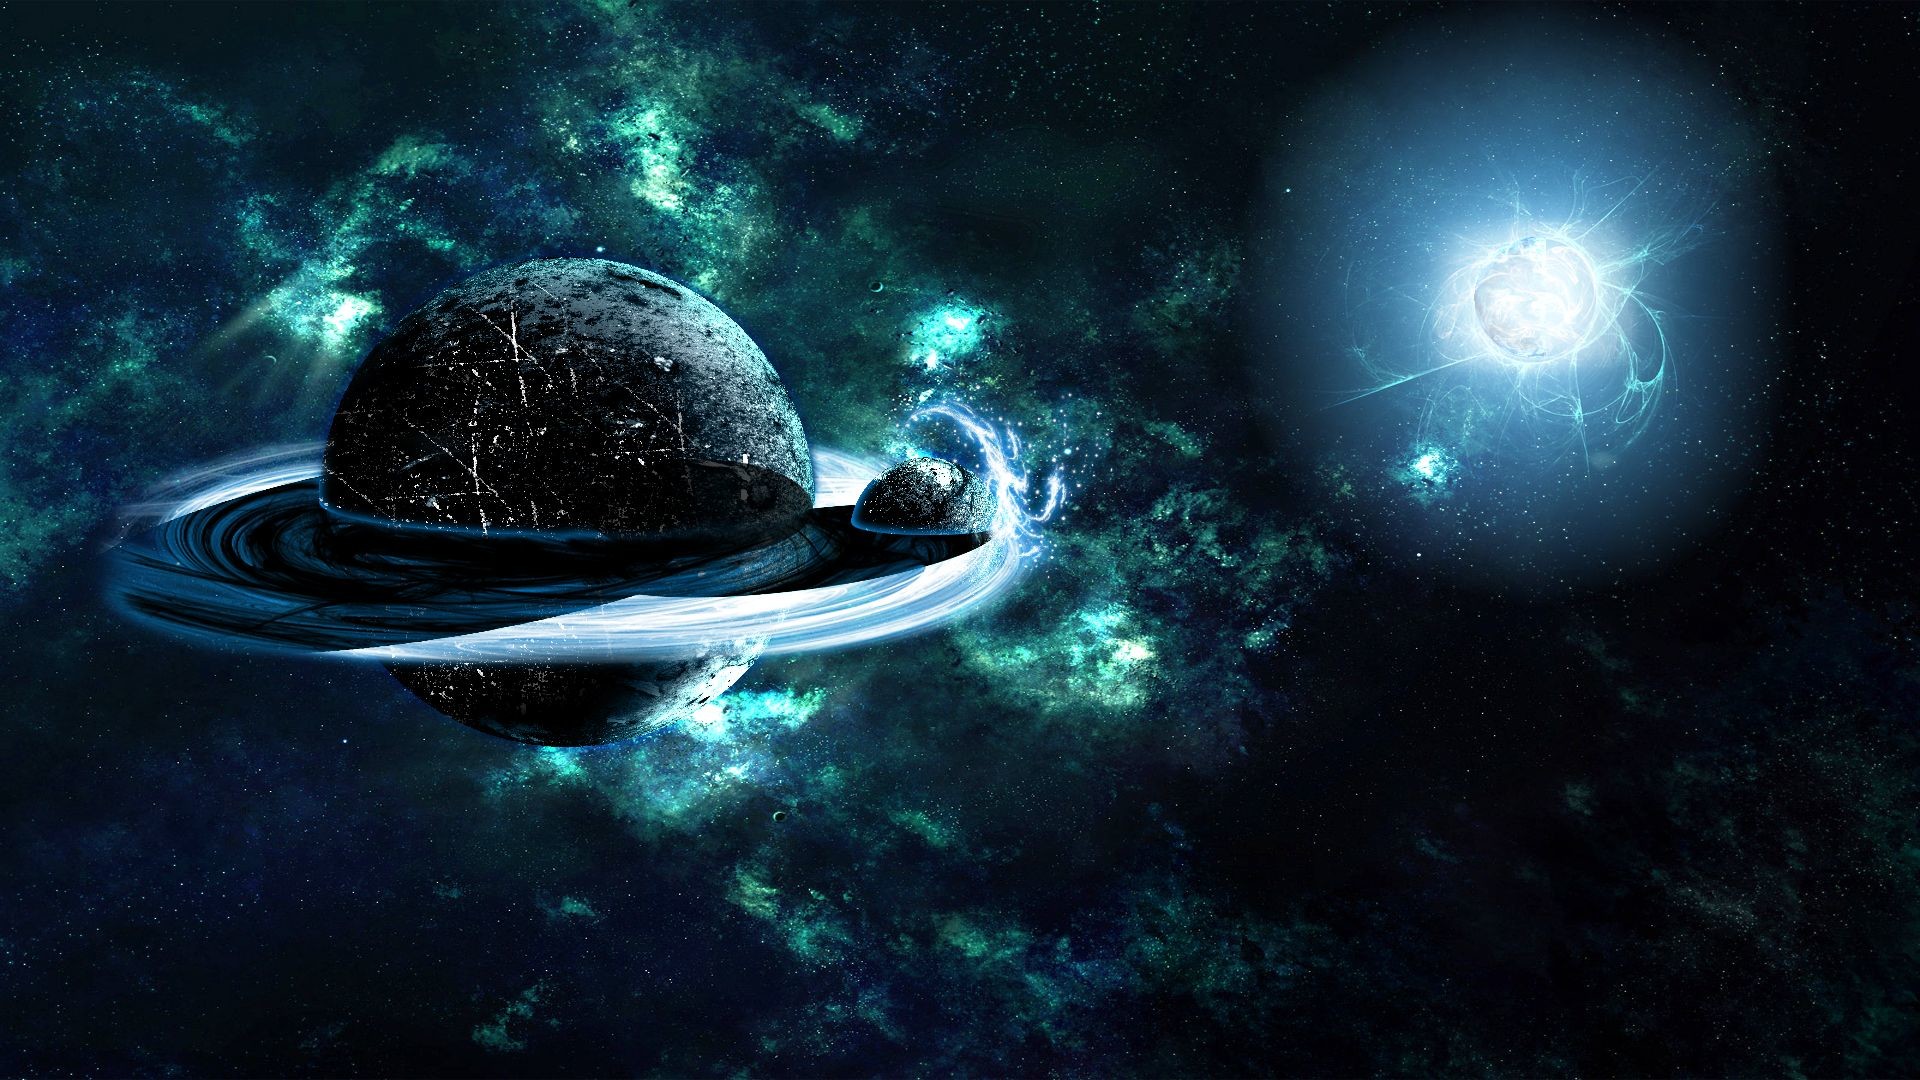 Outer Space Full HD Quality Wallpapers, Widescreen Wallpapers Pictures Of Space  Wallpapers Wallpapers)